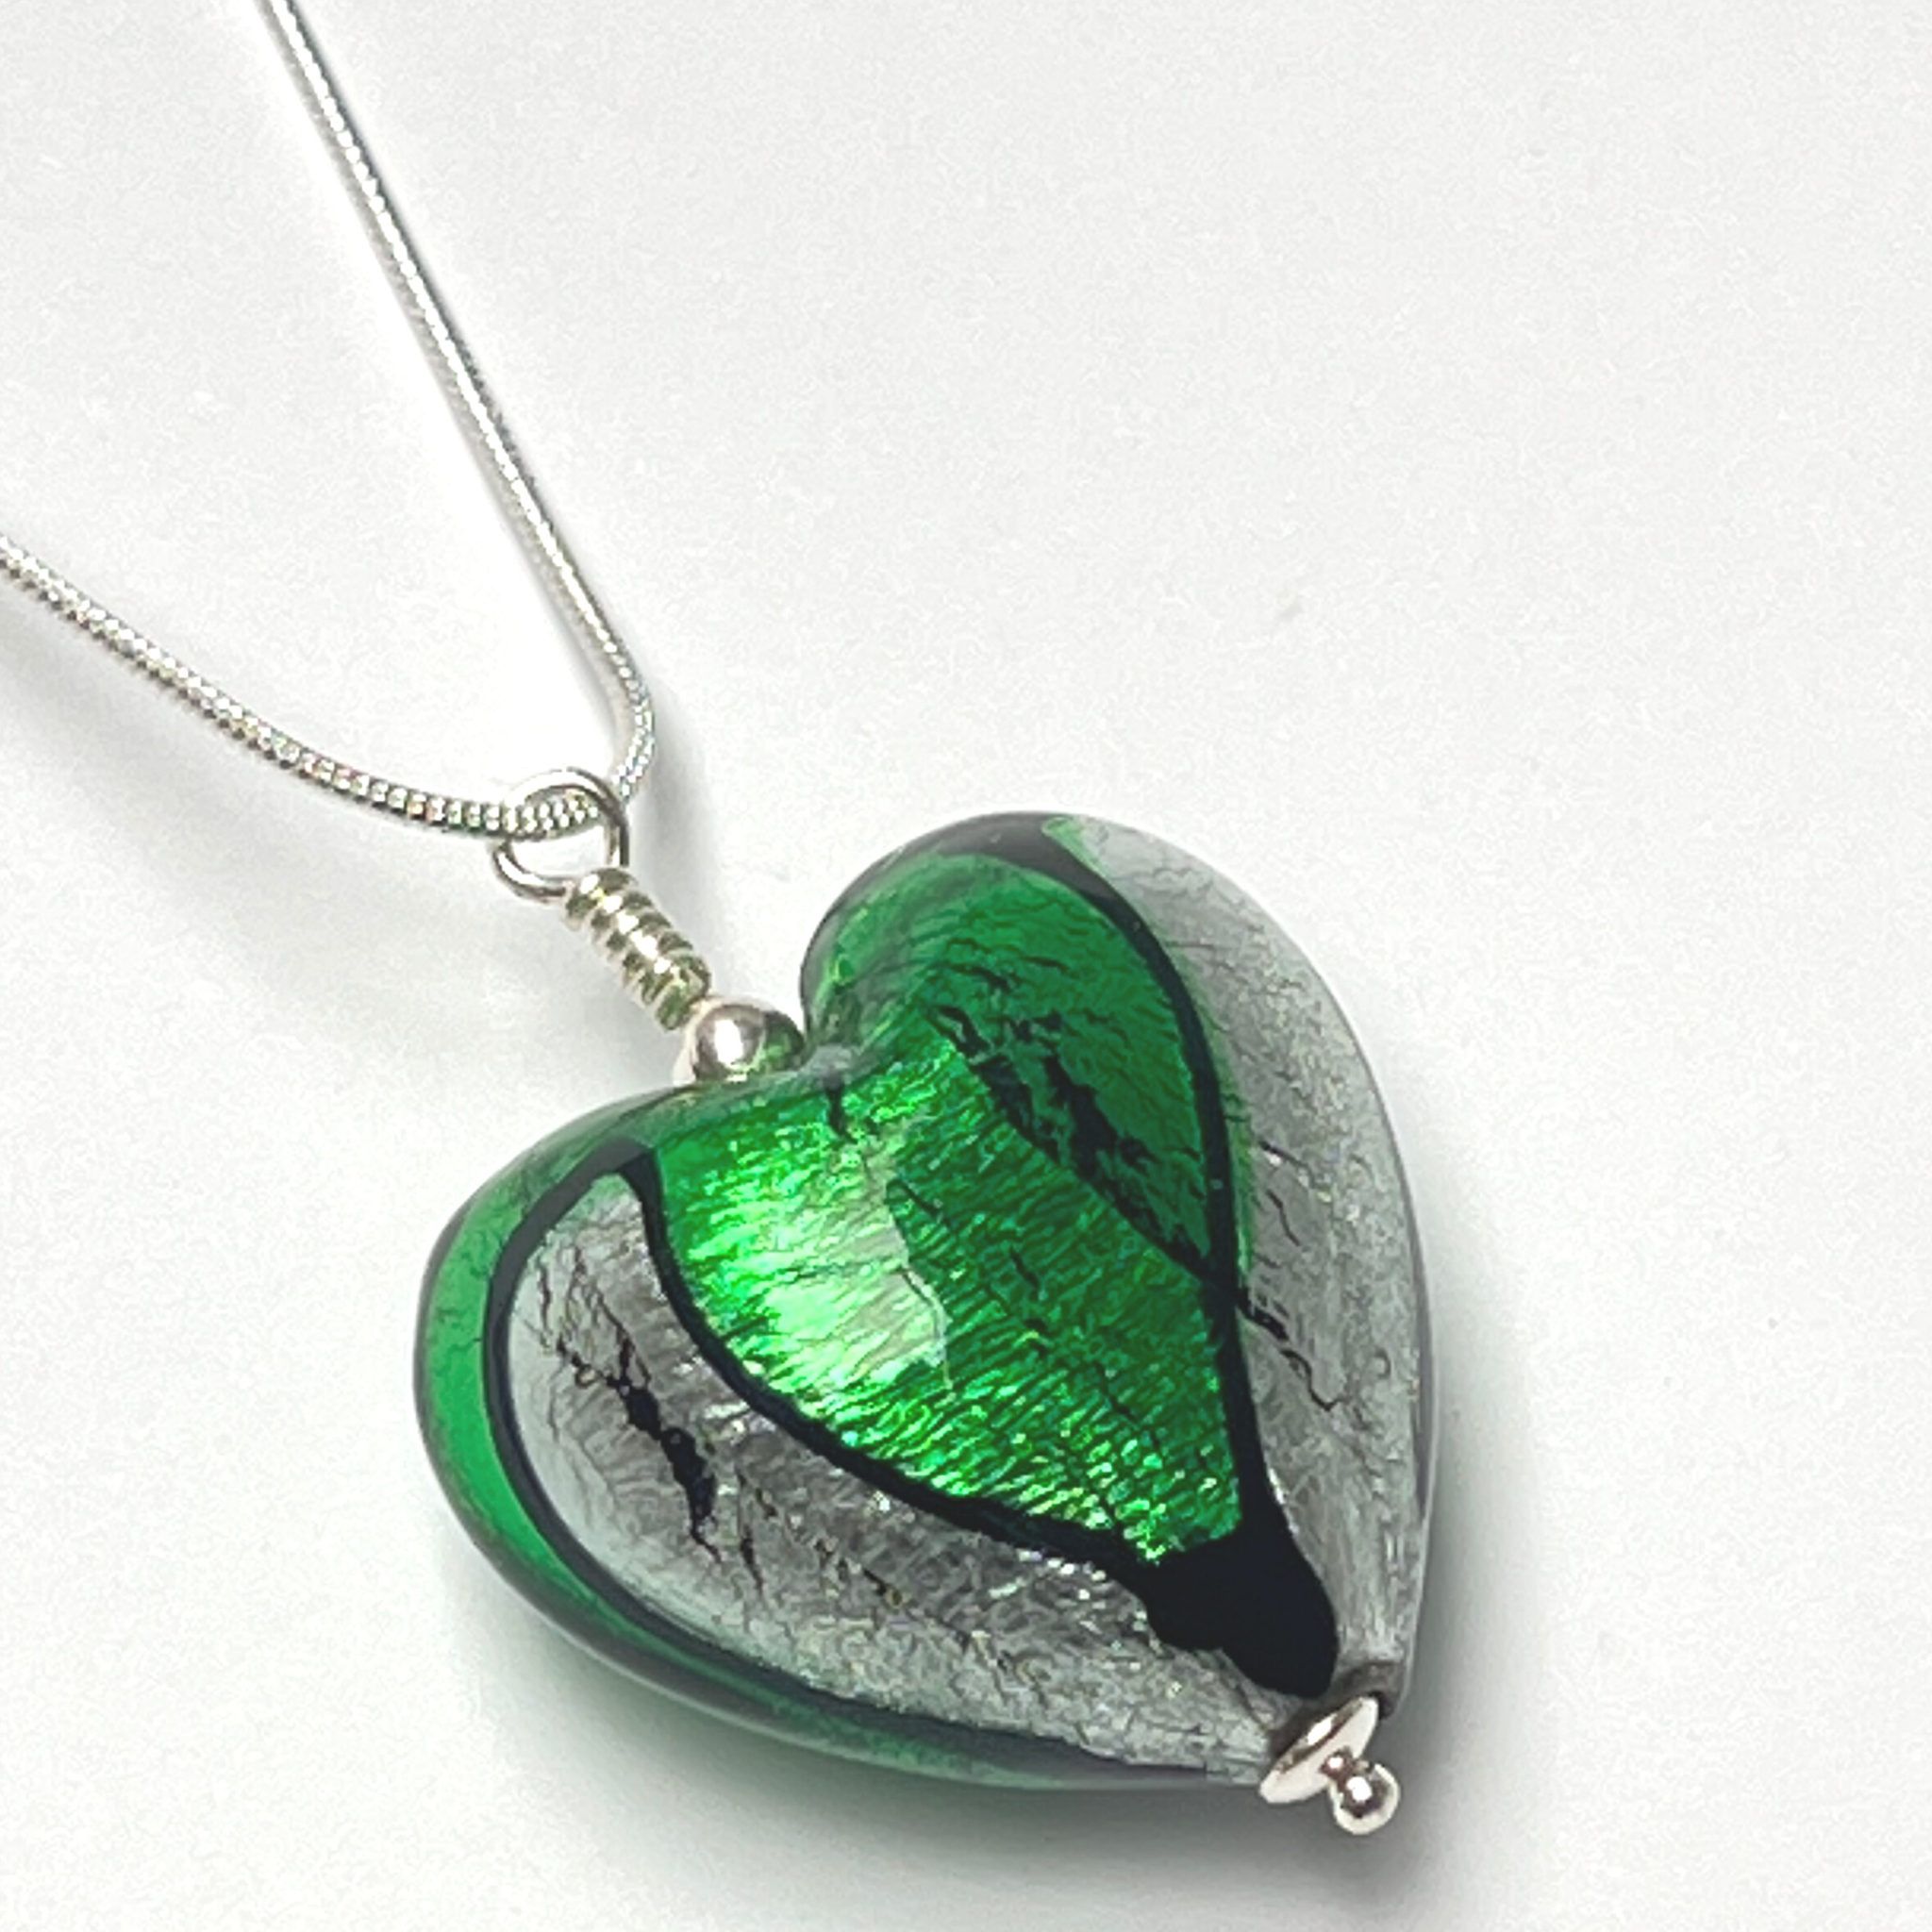 Murano Glass Venetian Love Heart Necklace - Silver and Lime Green